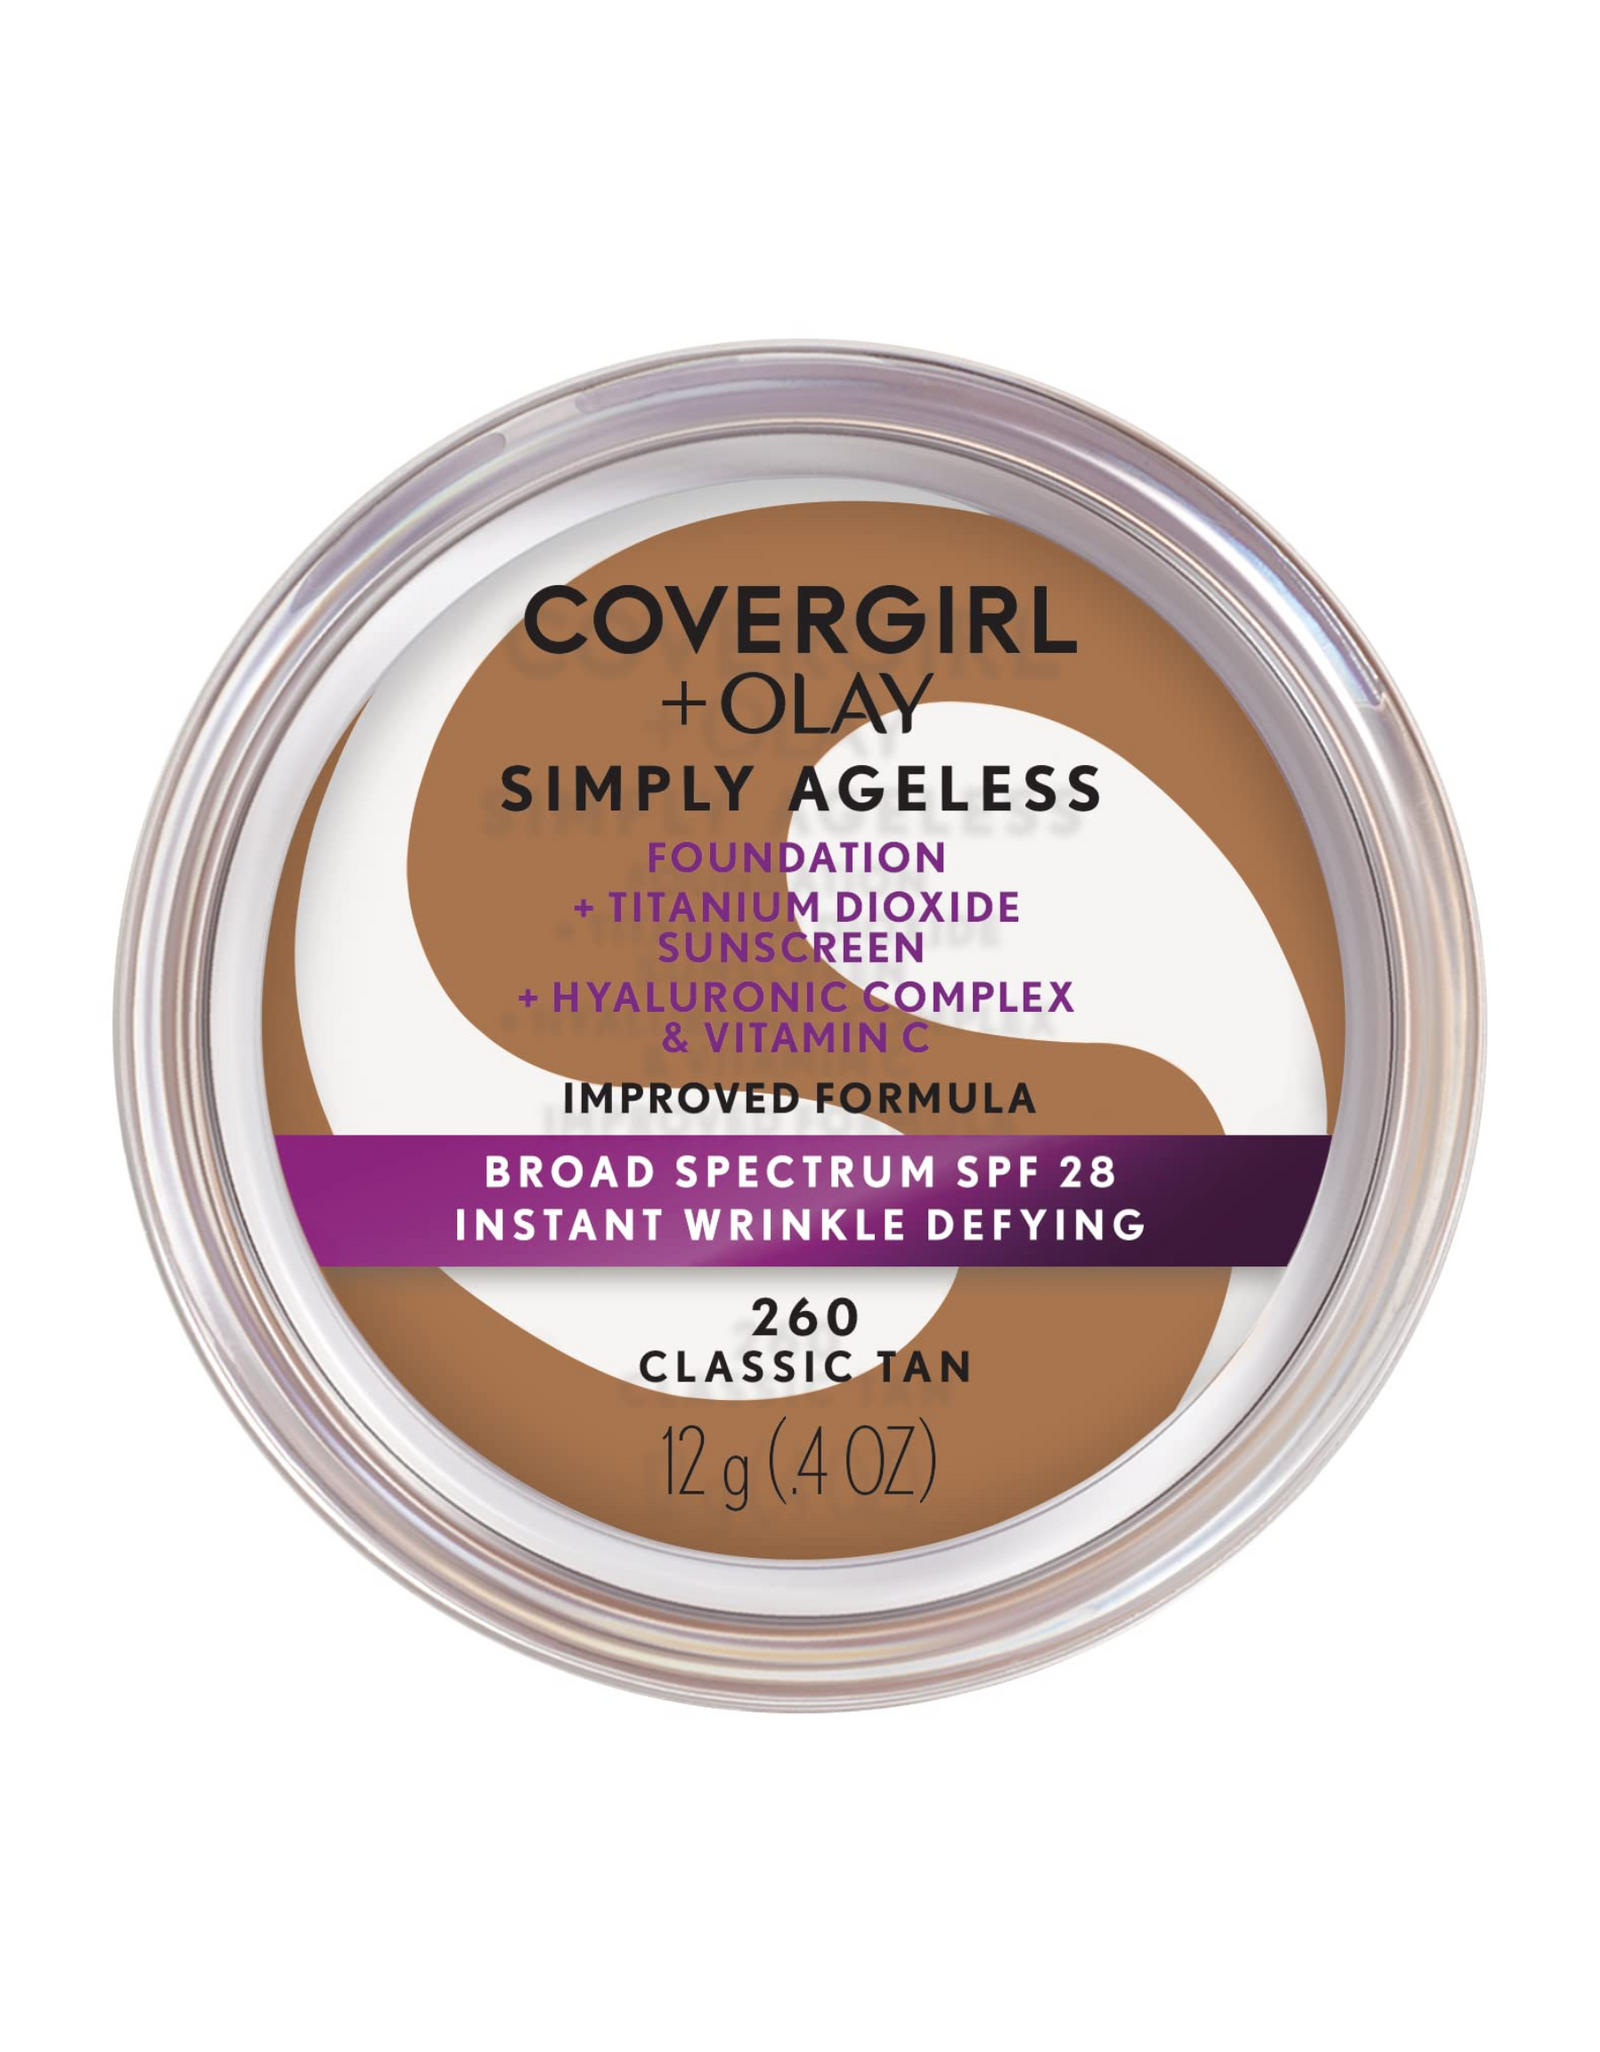 COVERGIRL & Olay Simply Ageless Foundation with Broad Spectrum SPF 28, Classic Tan, 0.44 oz